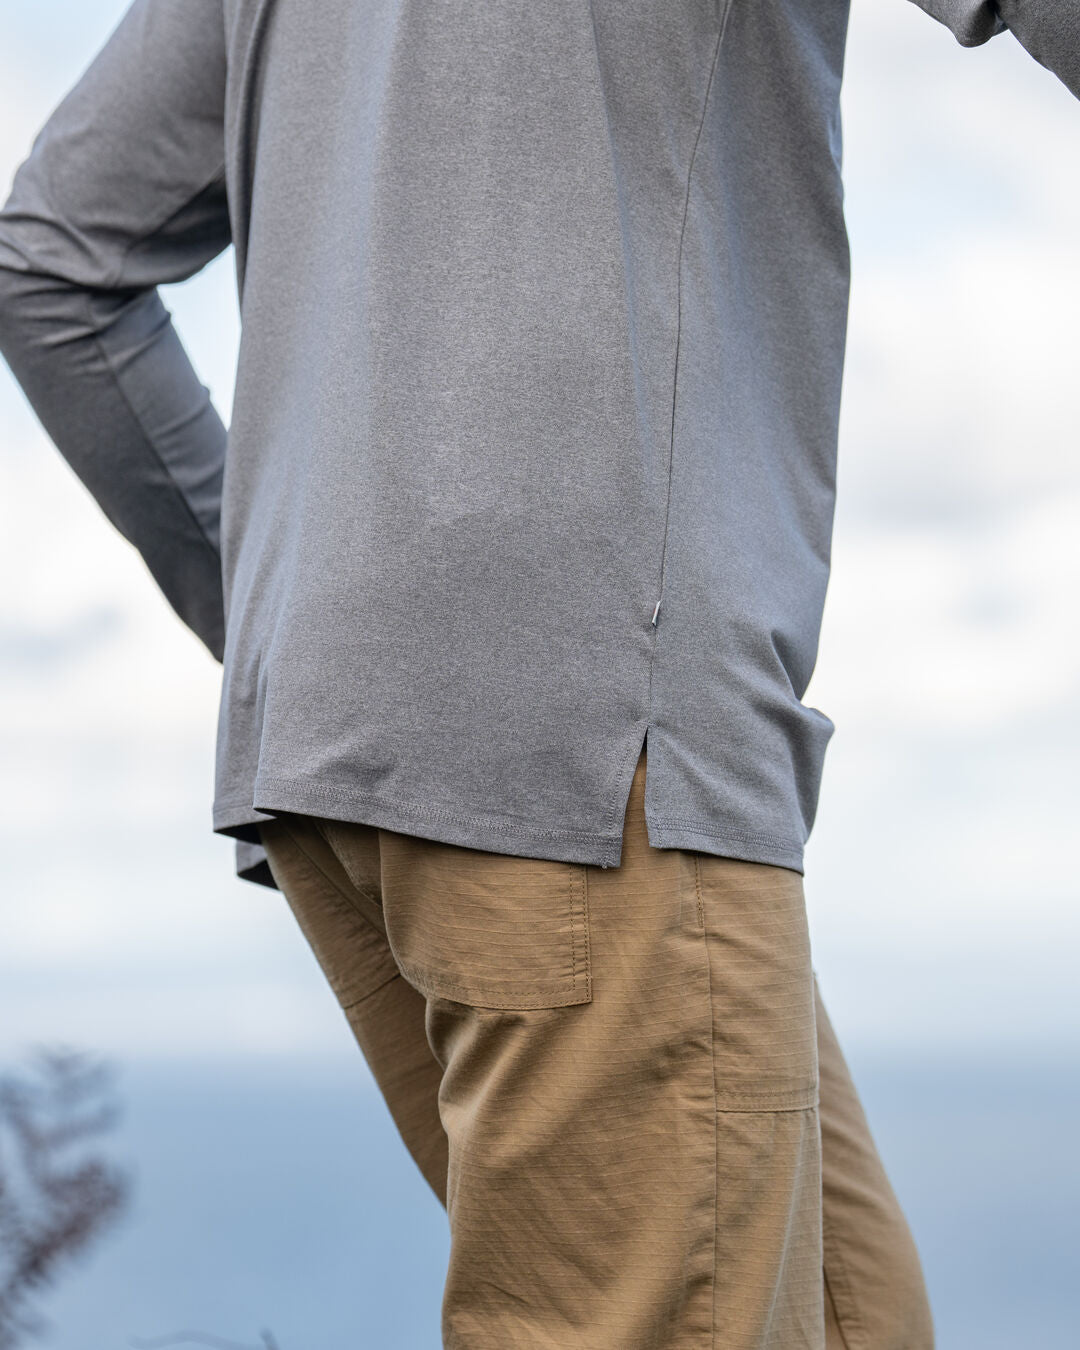 Classic Active Recycled Marl LS T-Shirt - Grey Marl